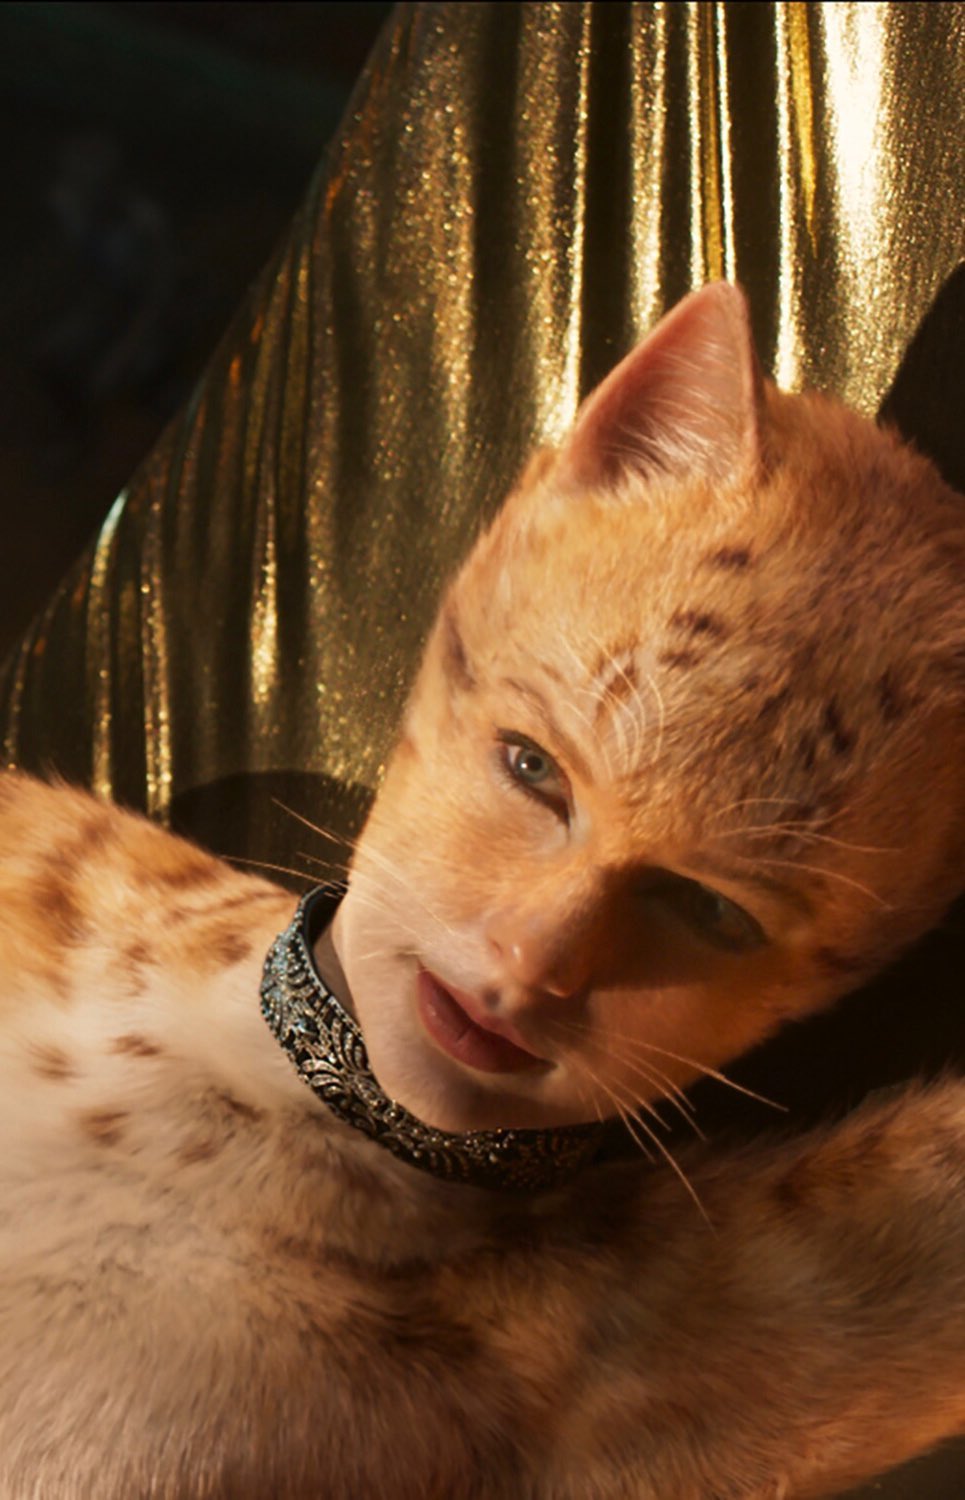 The Cats Movie Trailer Has Been Released And Netizens Are Finding The Furry Stars Creepy Ibtimes India